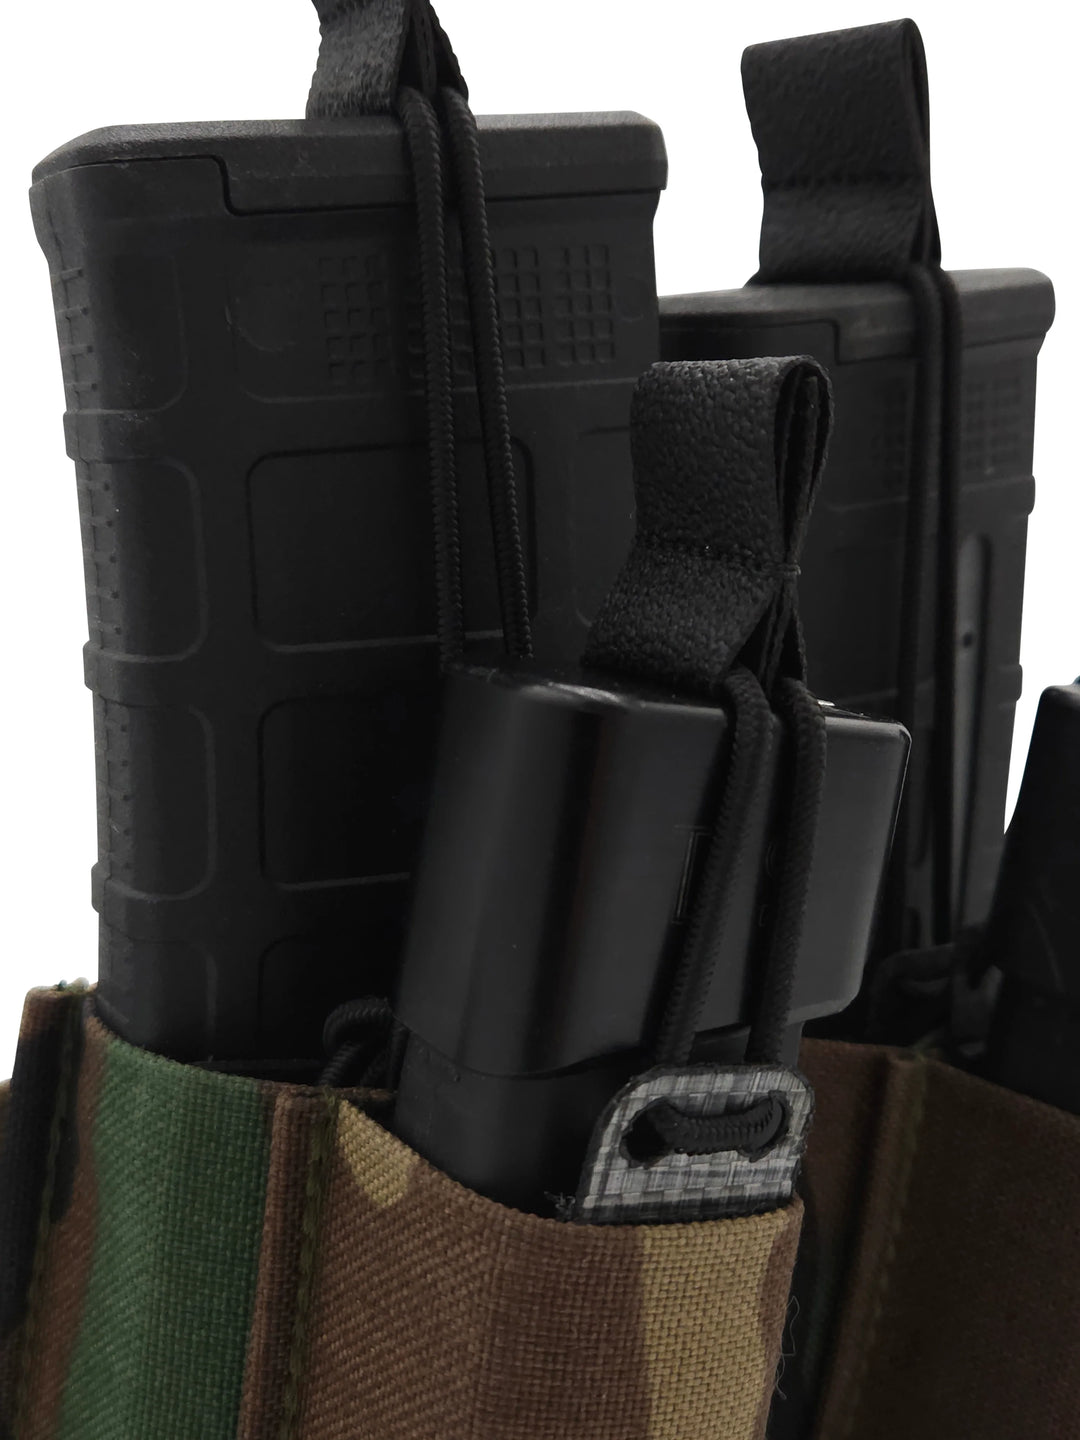 Forge Concepts Bungee Retention Adapter - Pistol